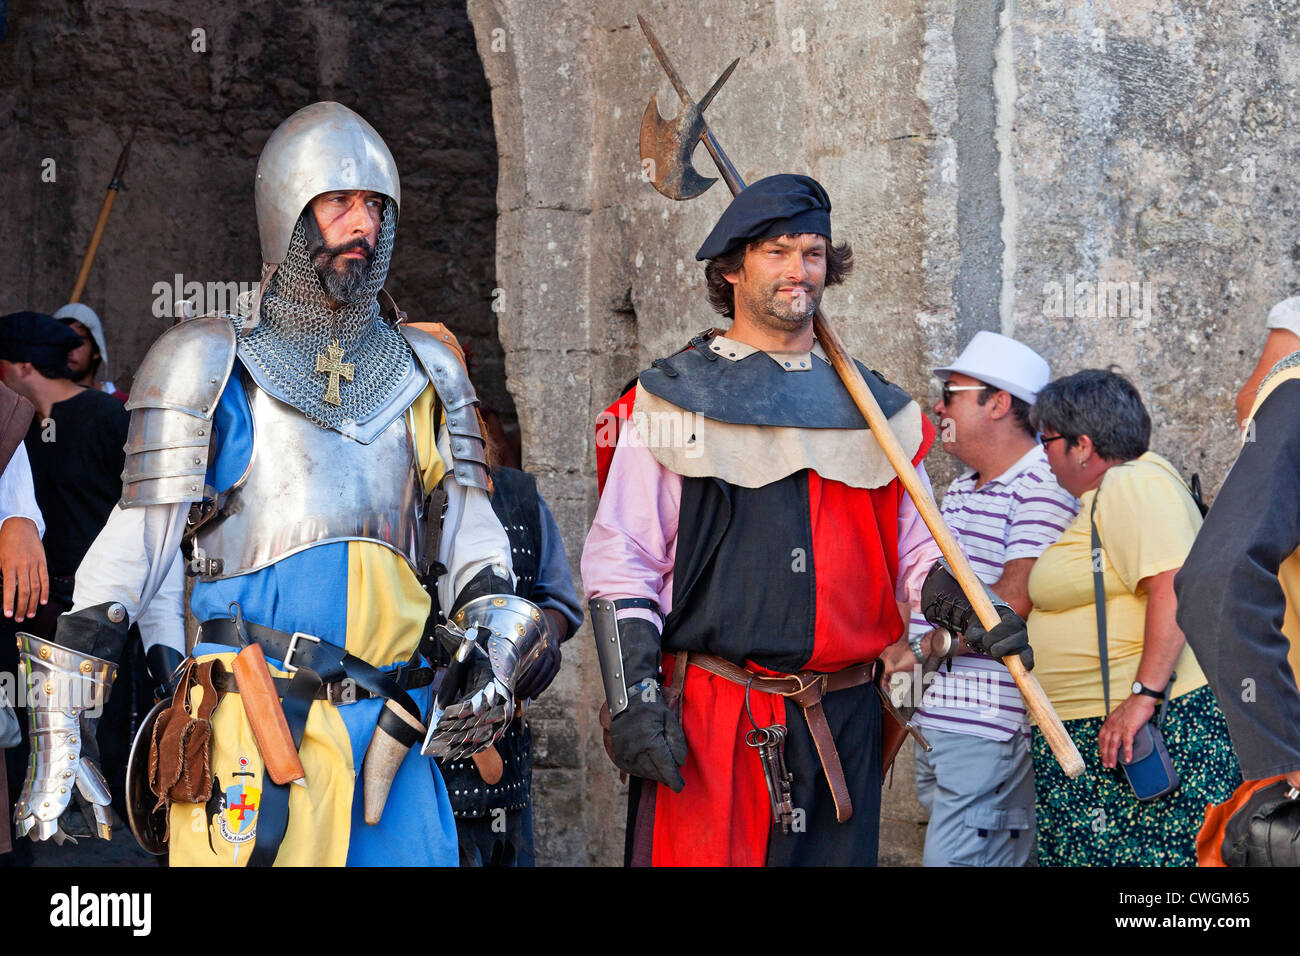 Warriors in a reenactment of a Medieval Fair in Óbidos, Portugal. Stock Photo